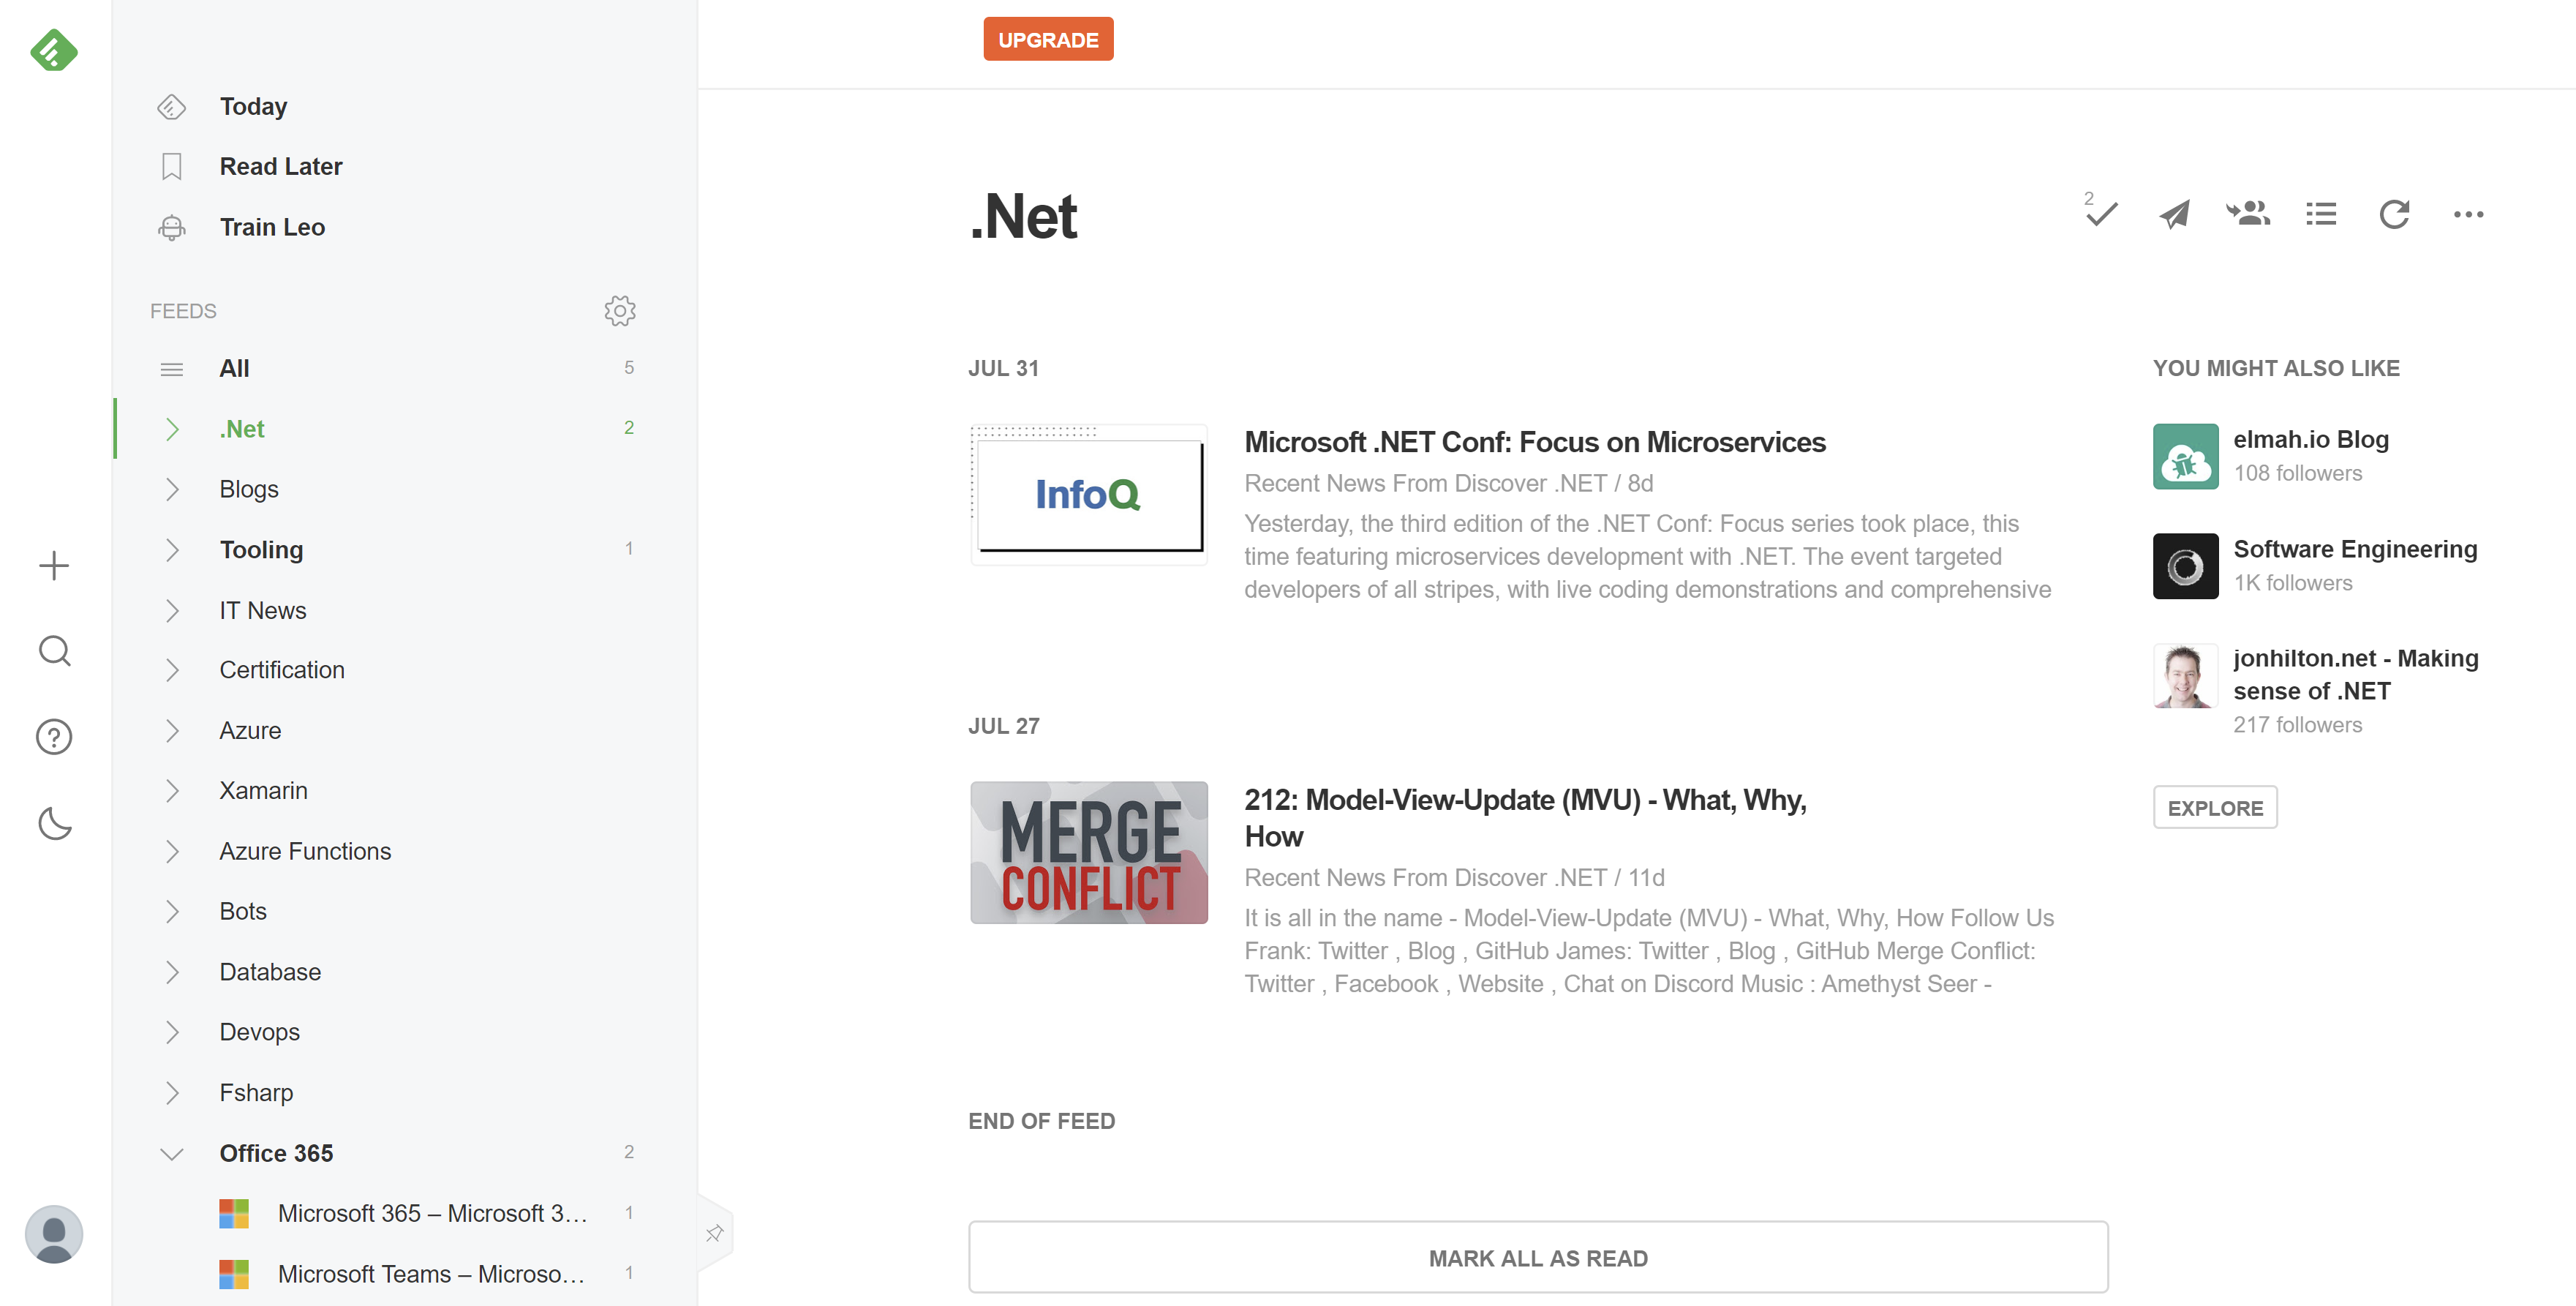 Feedly screenshots with different RSS feeds displayed.